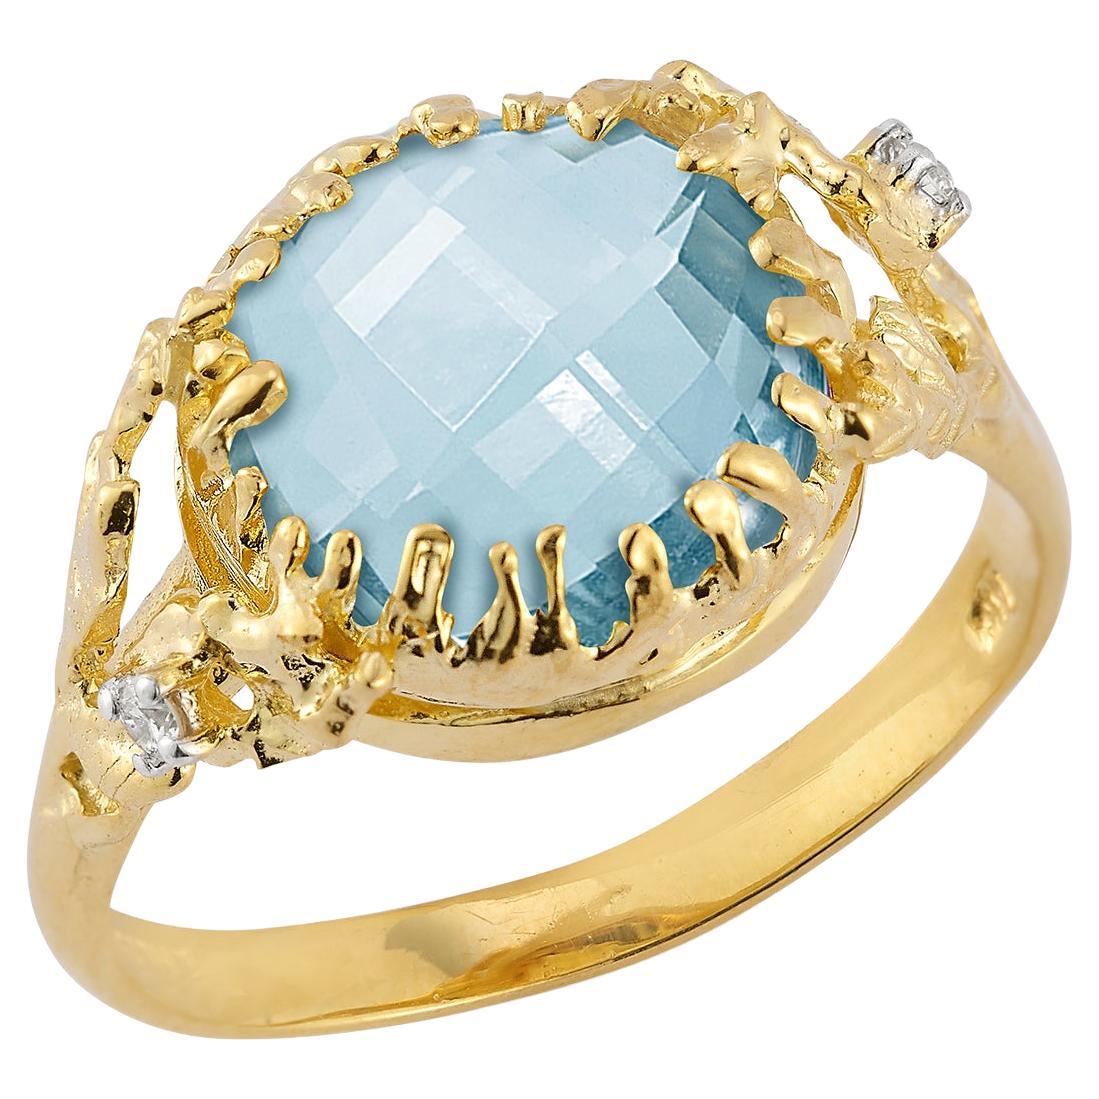 For Sale:  Hand-Crafted 14K Gold 0.03 ct. tw. Diamond & 4.25CT Blue Topaz Color Stone Ring